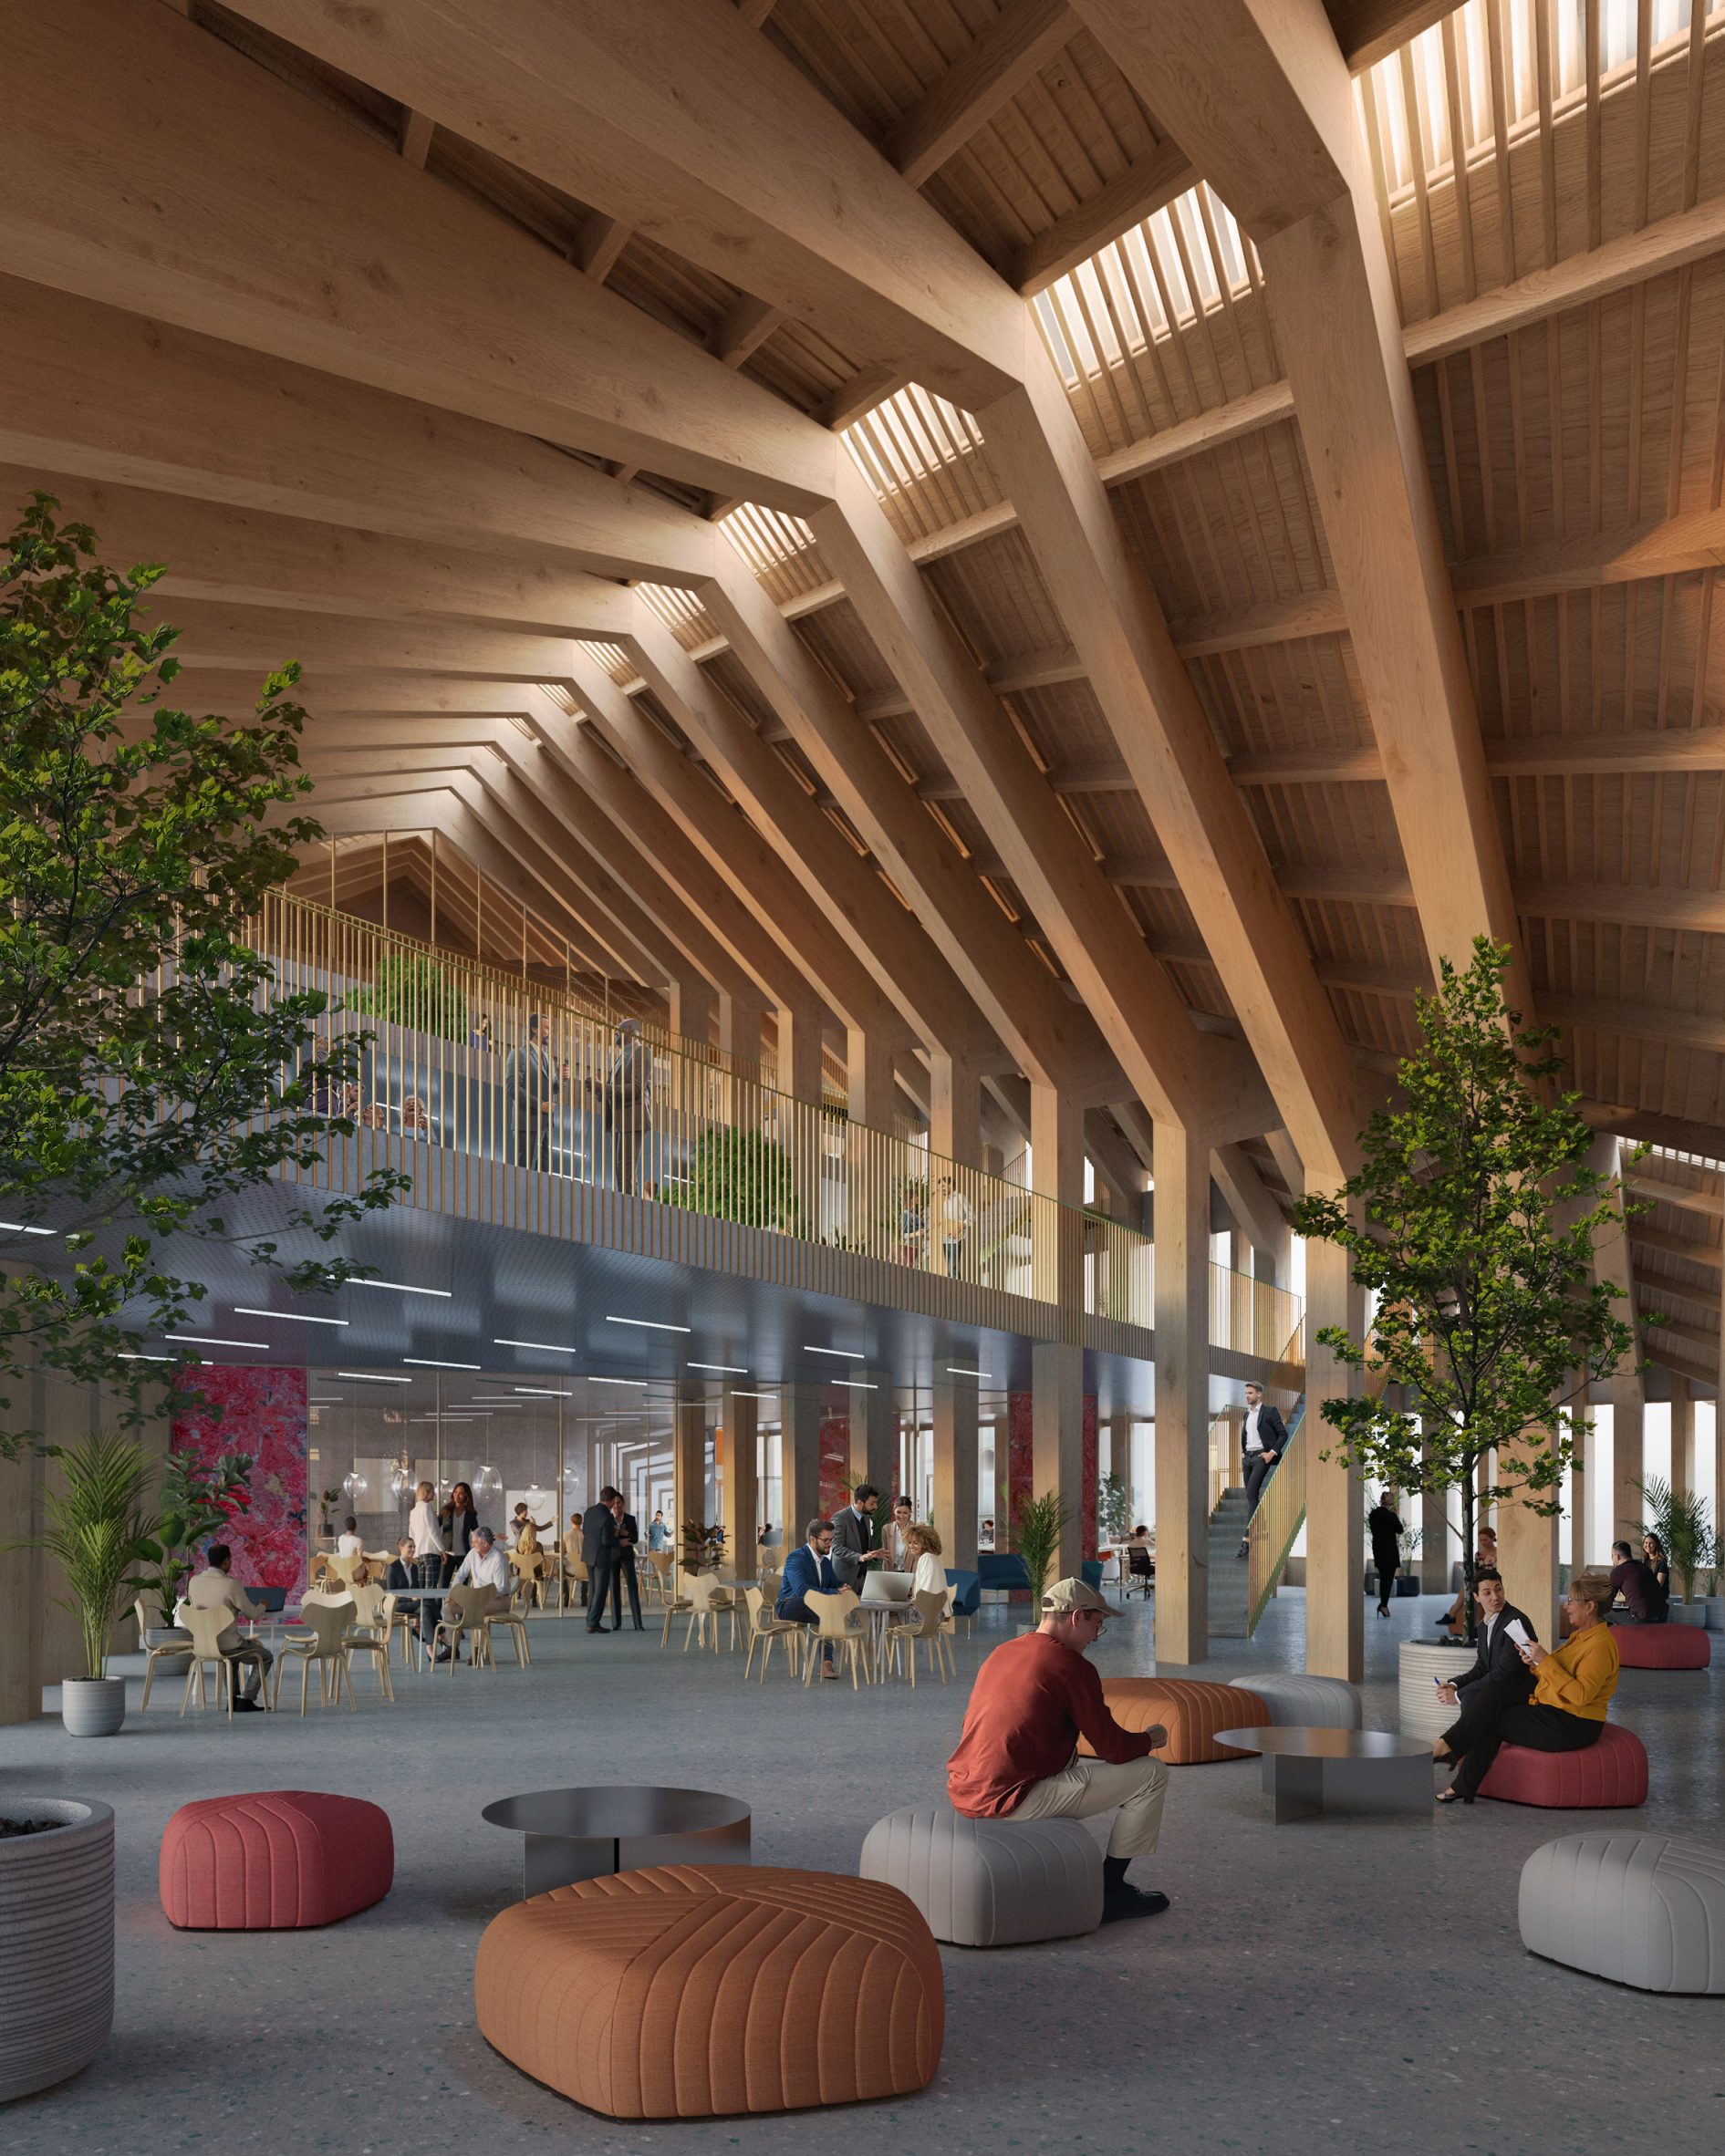 Mass-timber building by BIG